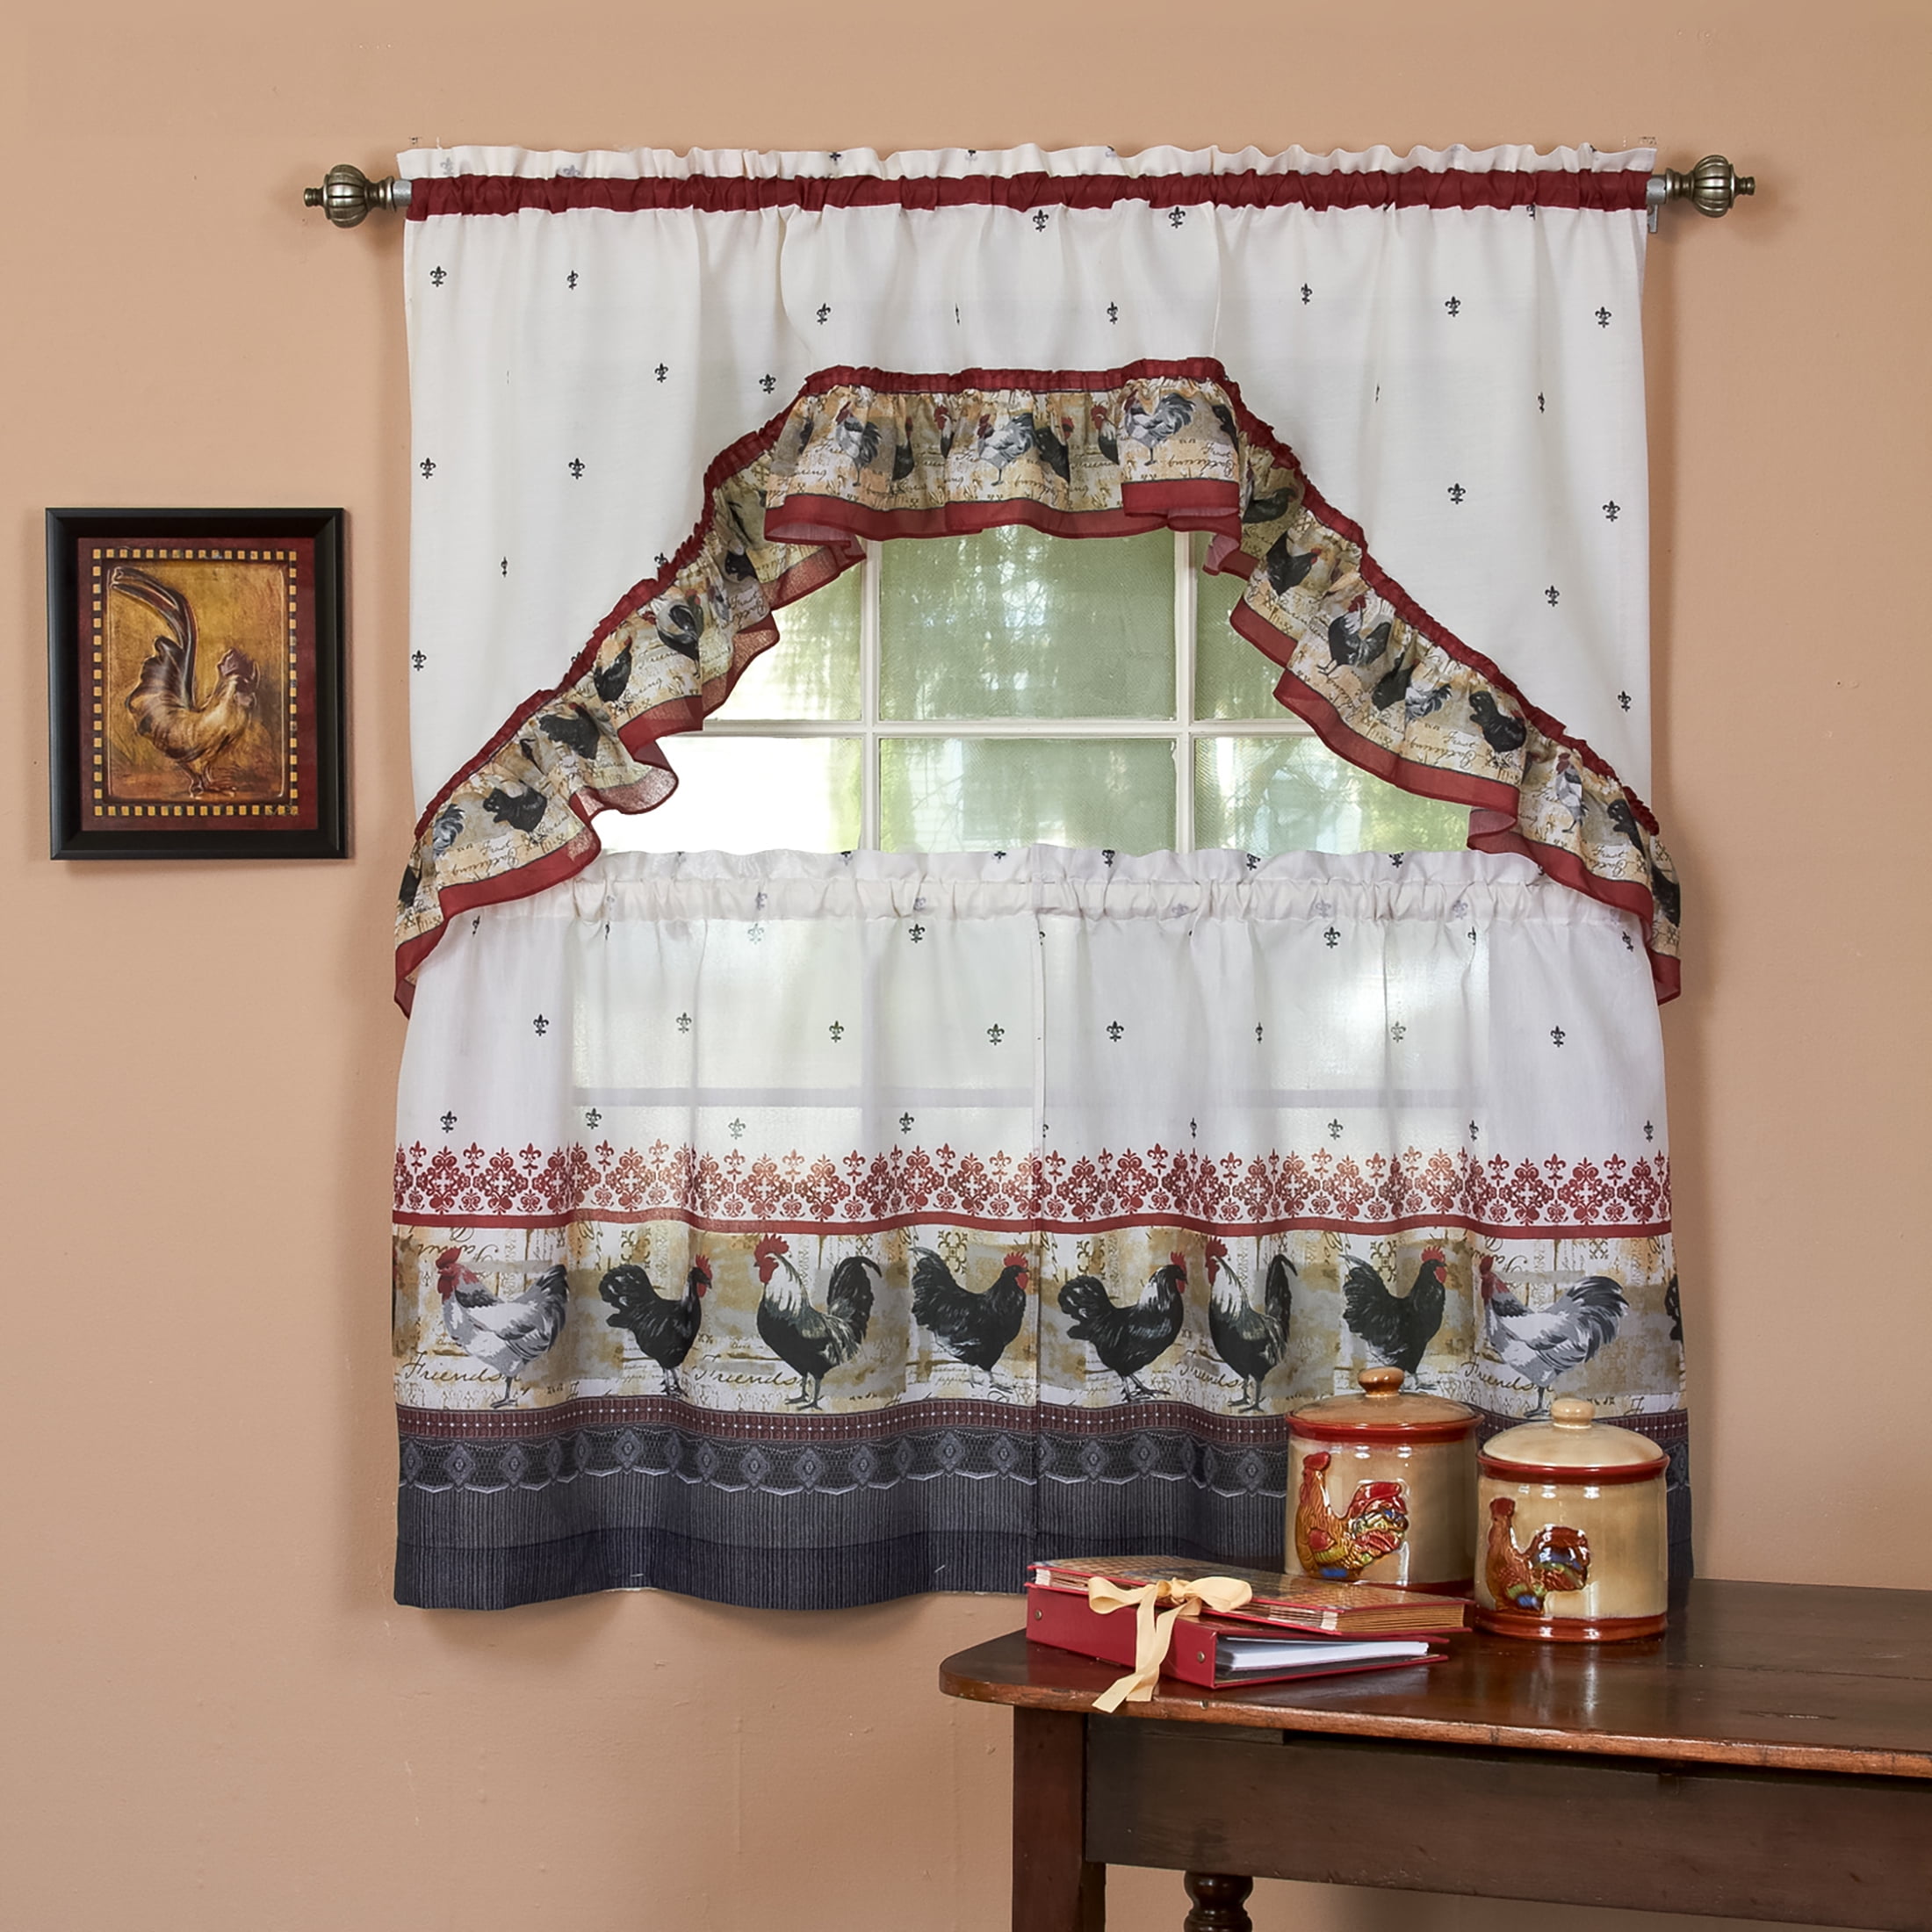 Woven Trends 3 Piece Kitchen Curtain Set Window Curtain Valance Rooster Kitchen Curtains For Kitchen And Living Room Cafe Curtain With Swag And Tier Window Curtain Set Walmart Com Walmart Com